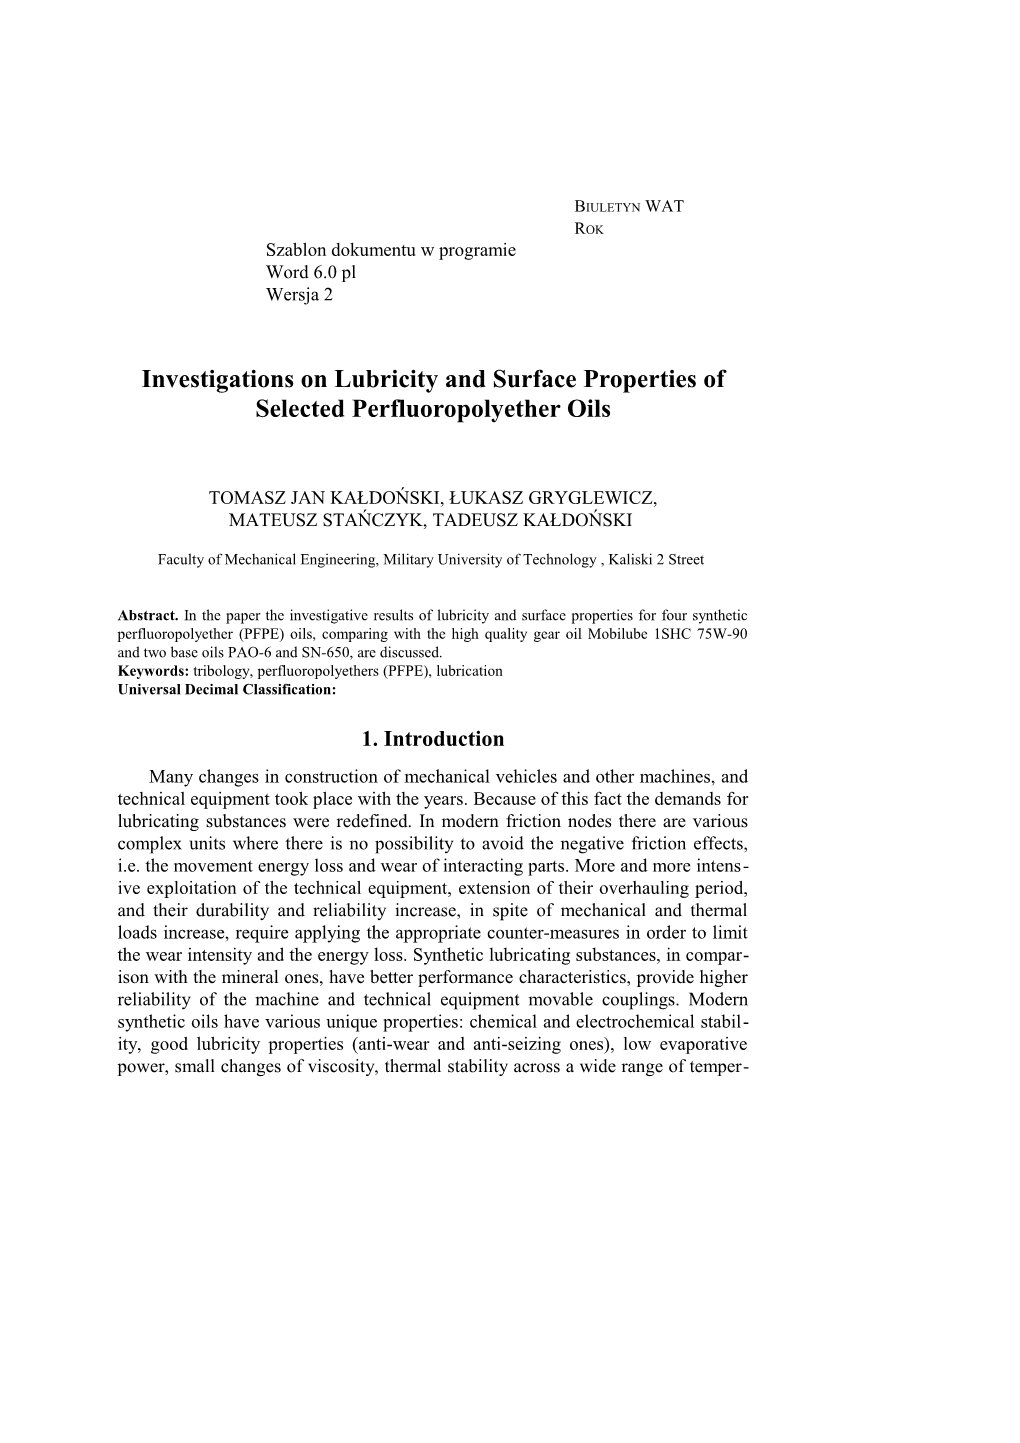 Investigations on Lubricity and Surface Properties of Selected